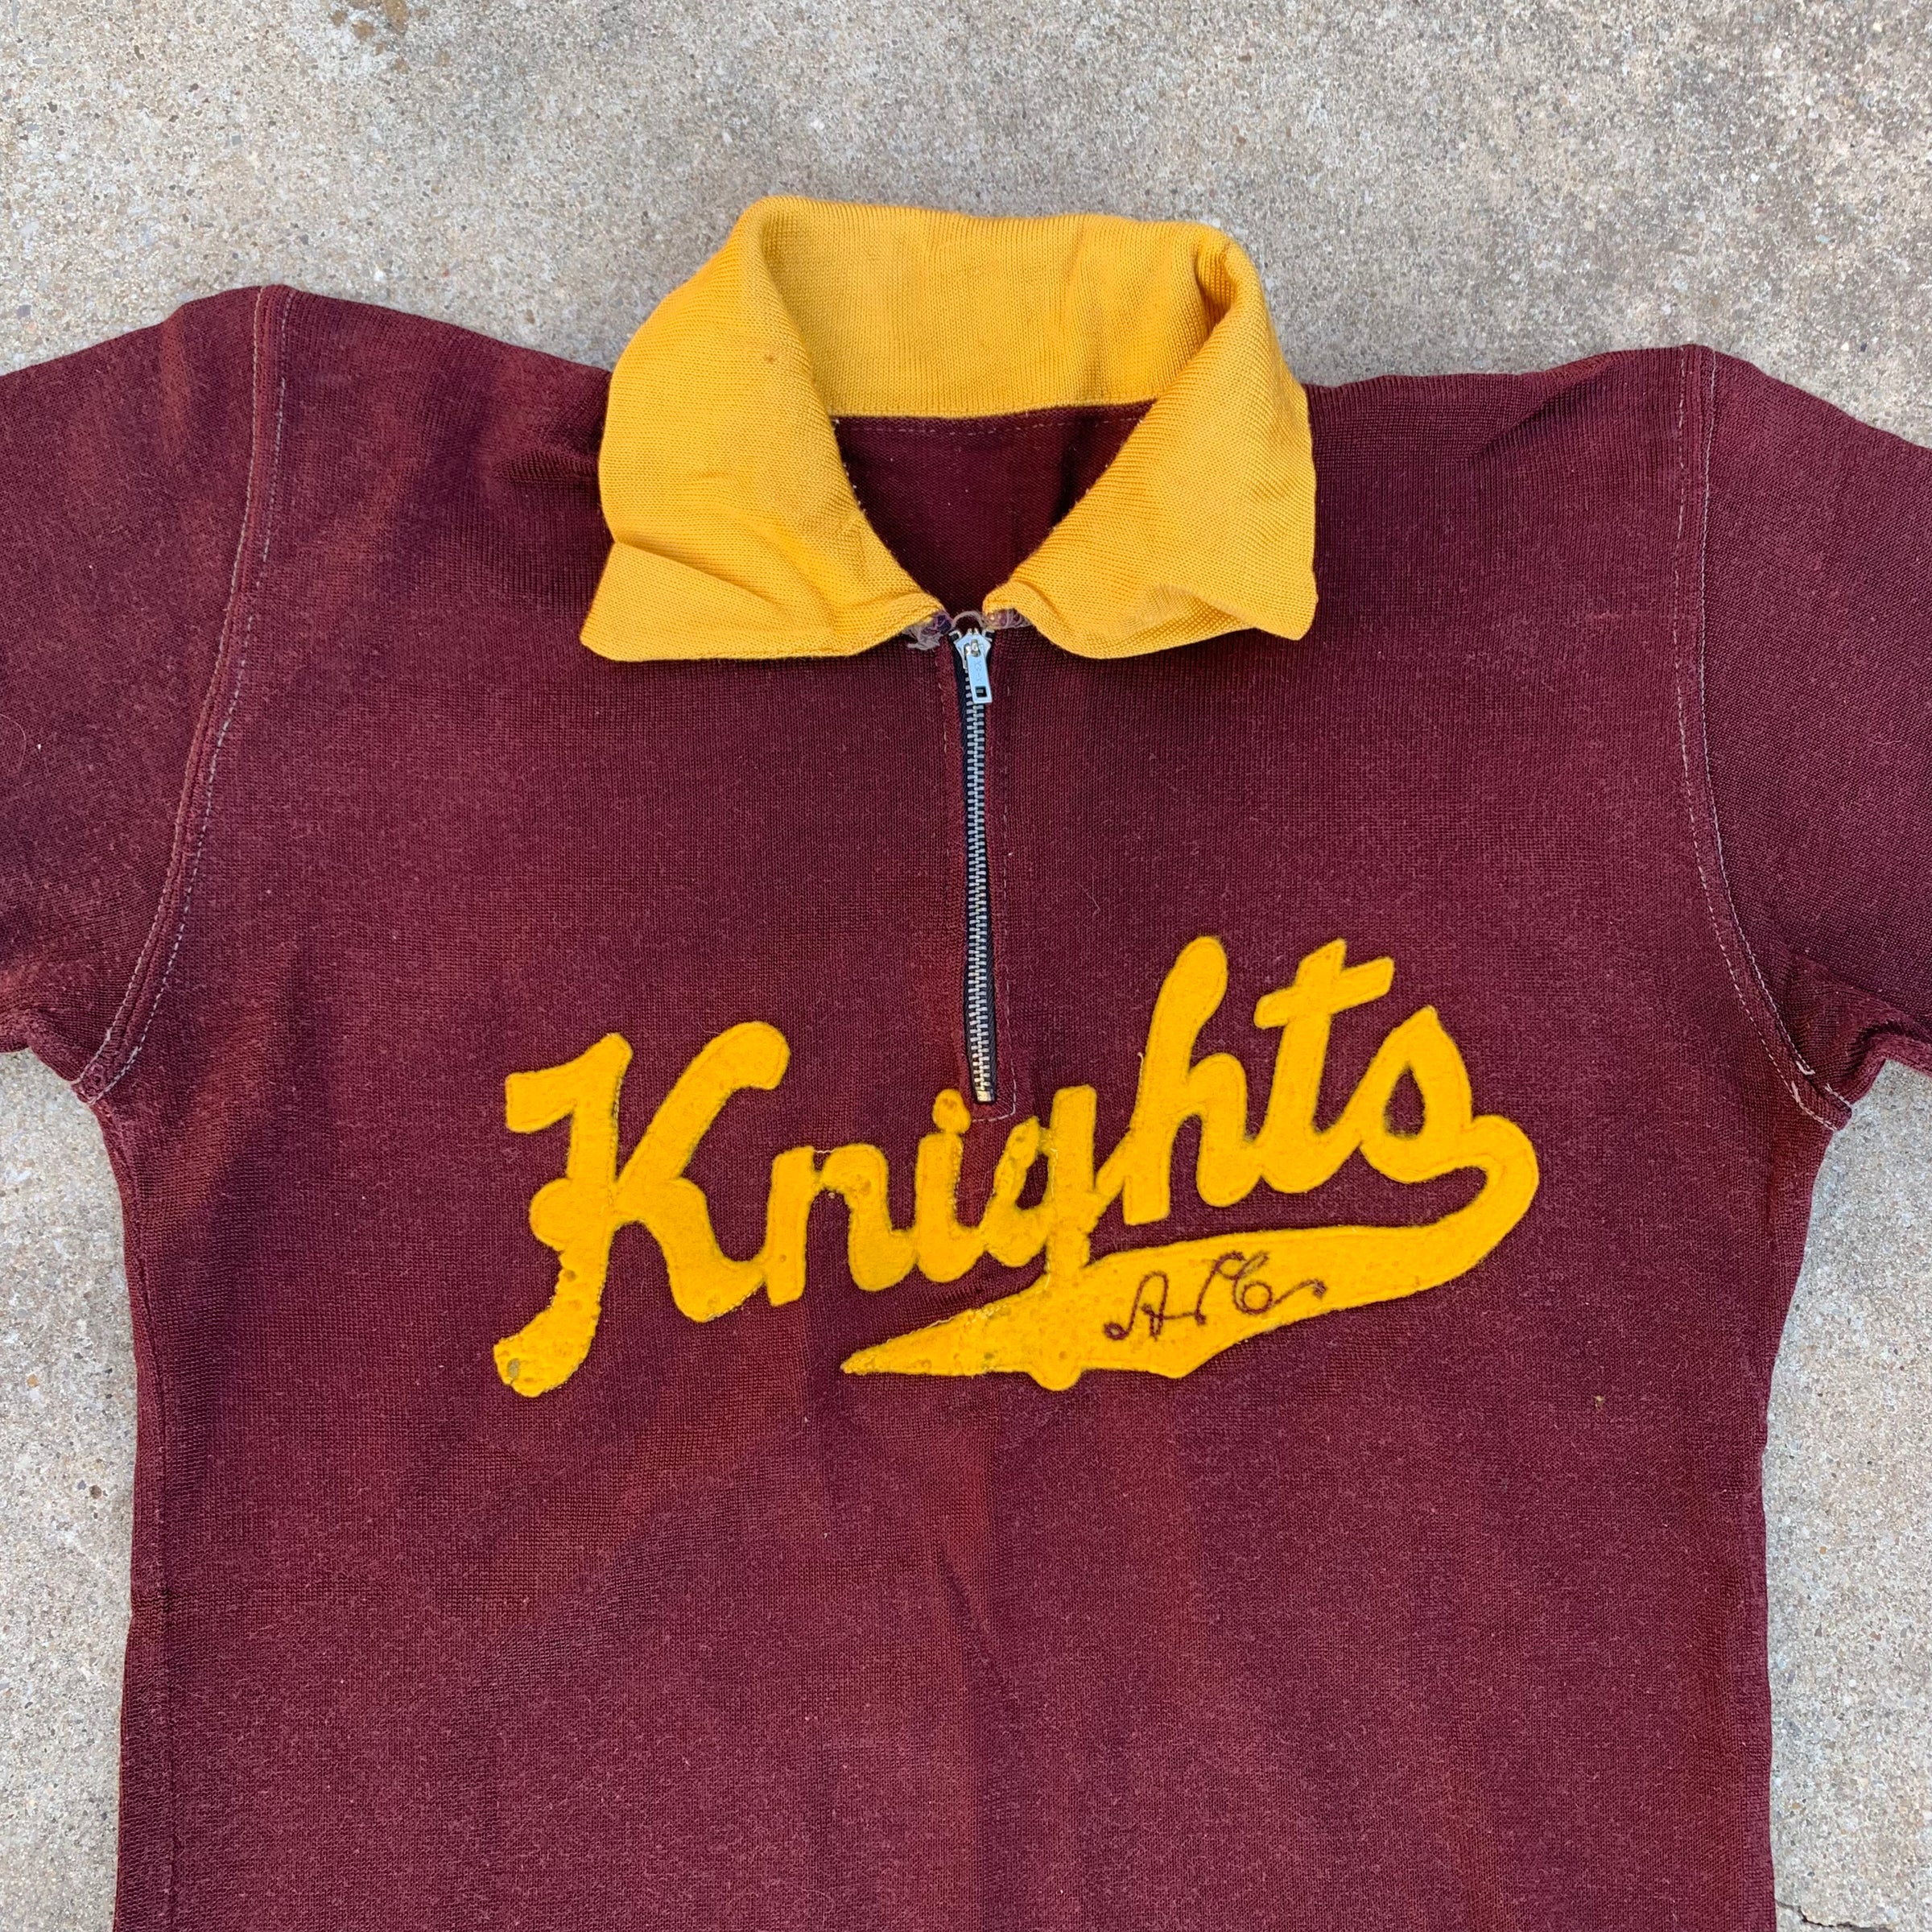 1940’s Knights Felt Patched Rayon Knit Jersey Small